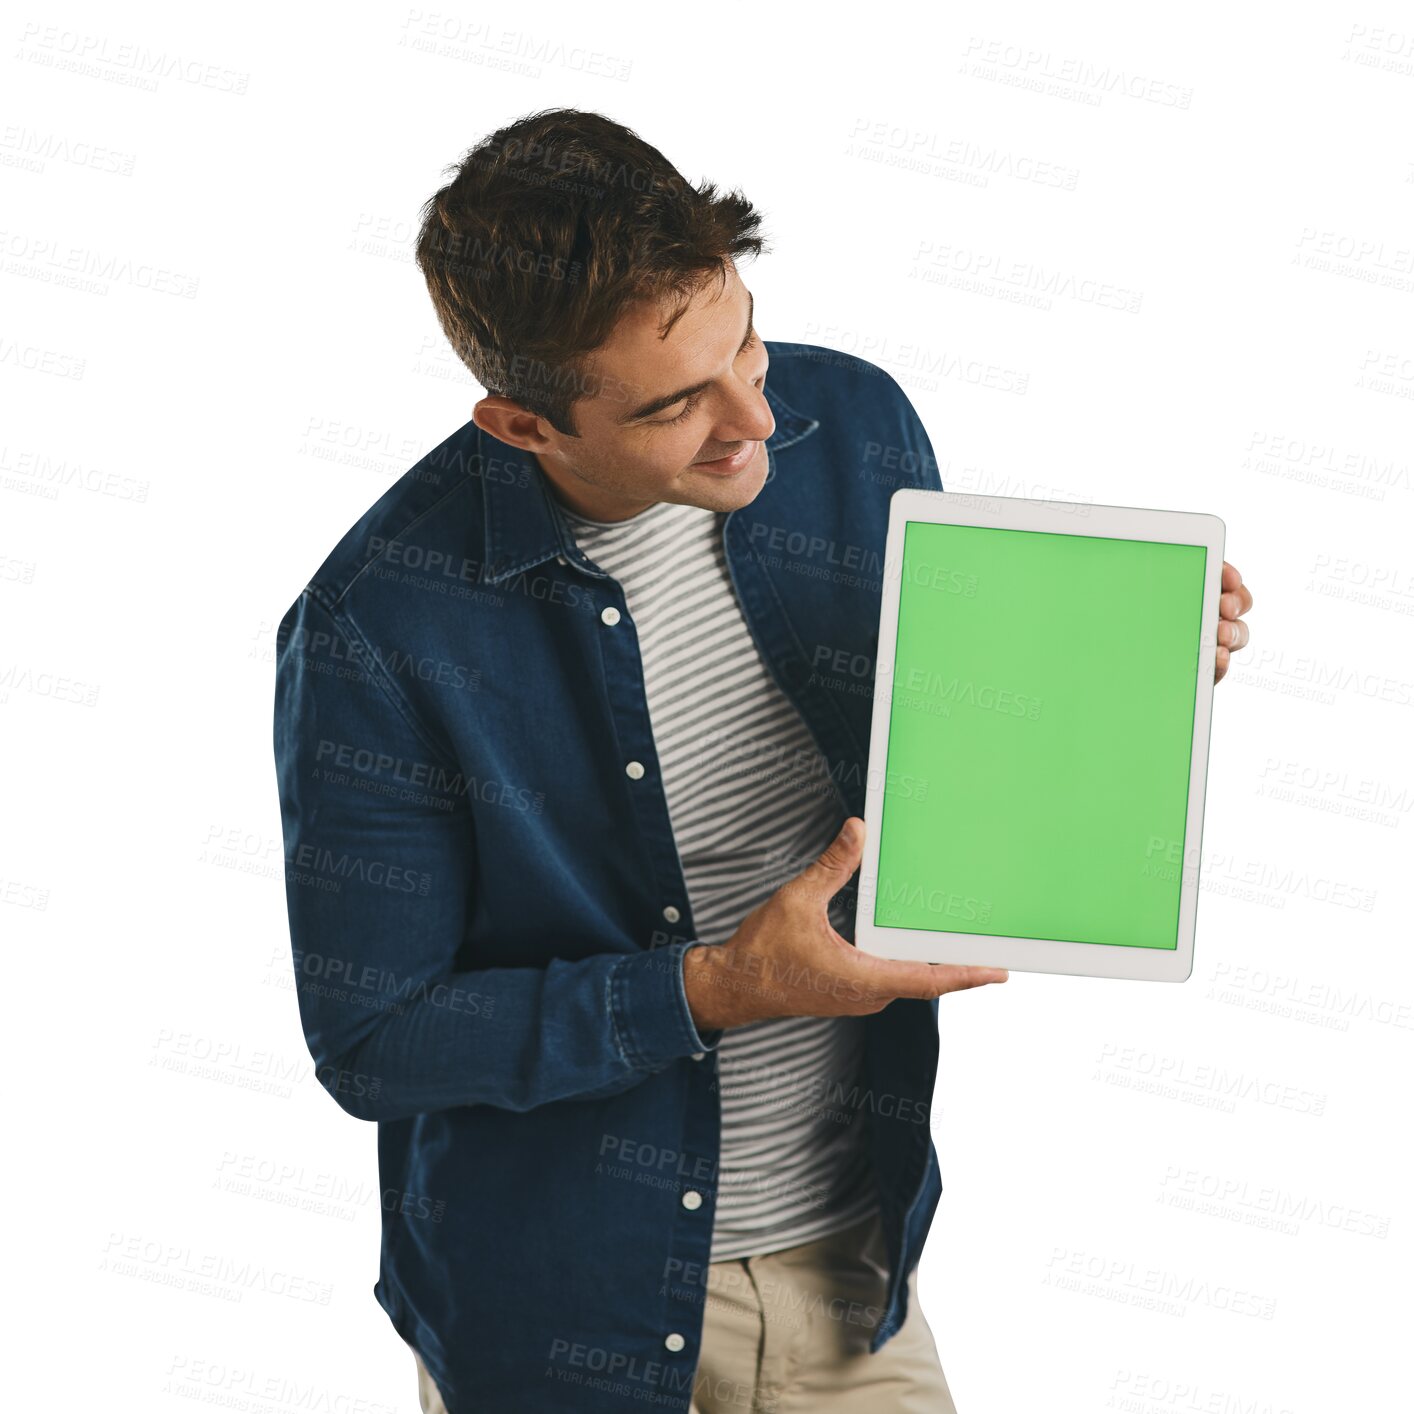 Buy stock photo Green screen, mockup and young man with tablet for advertising, promotion or marketing. Happy, smile and male person with chroma key digital technology for isolated by transparent png background.